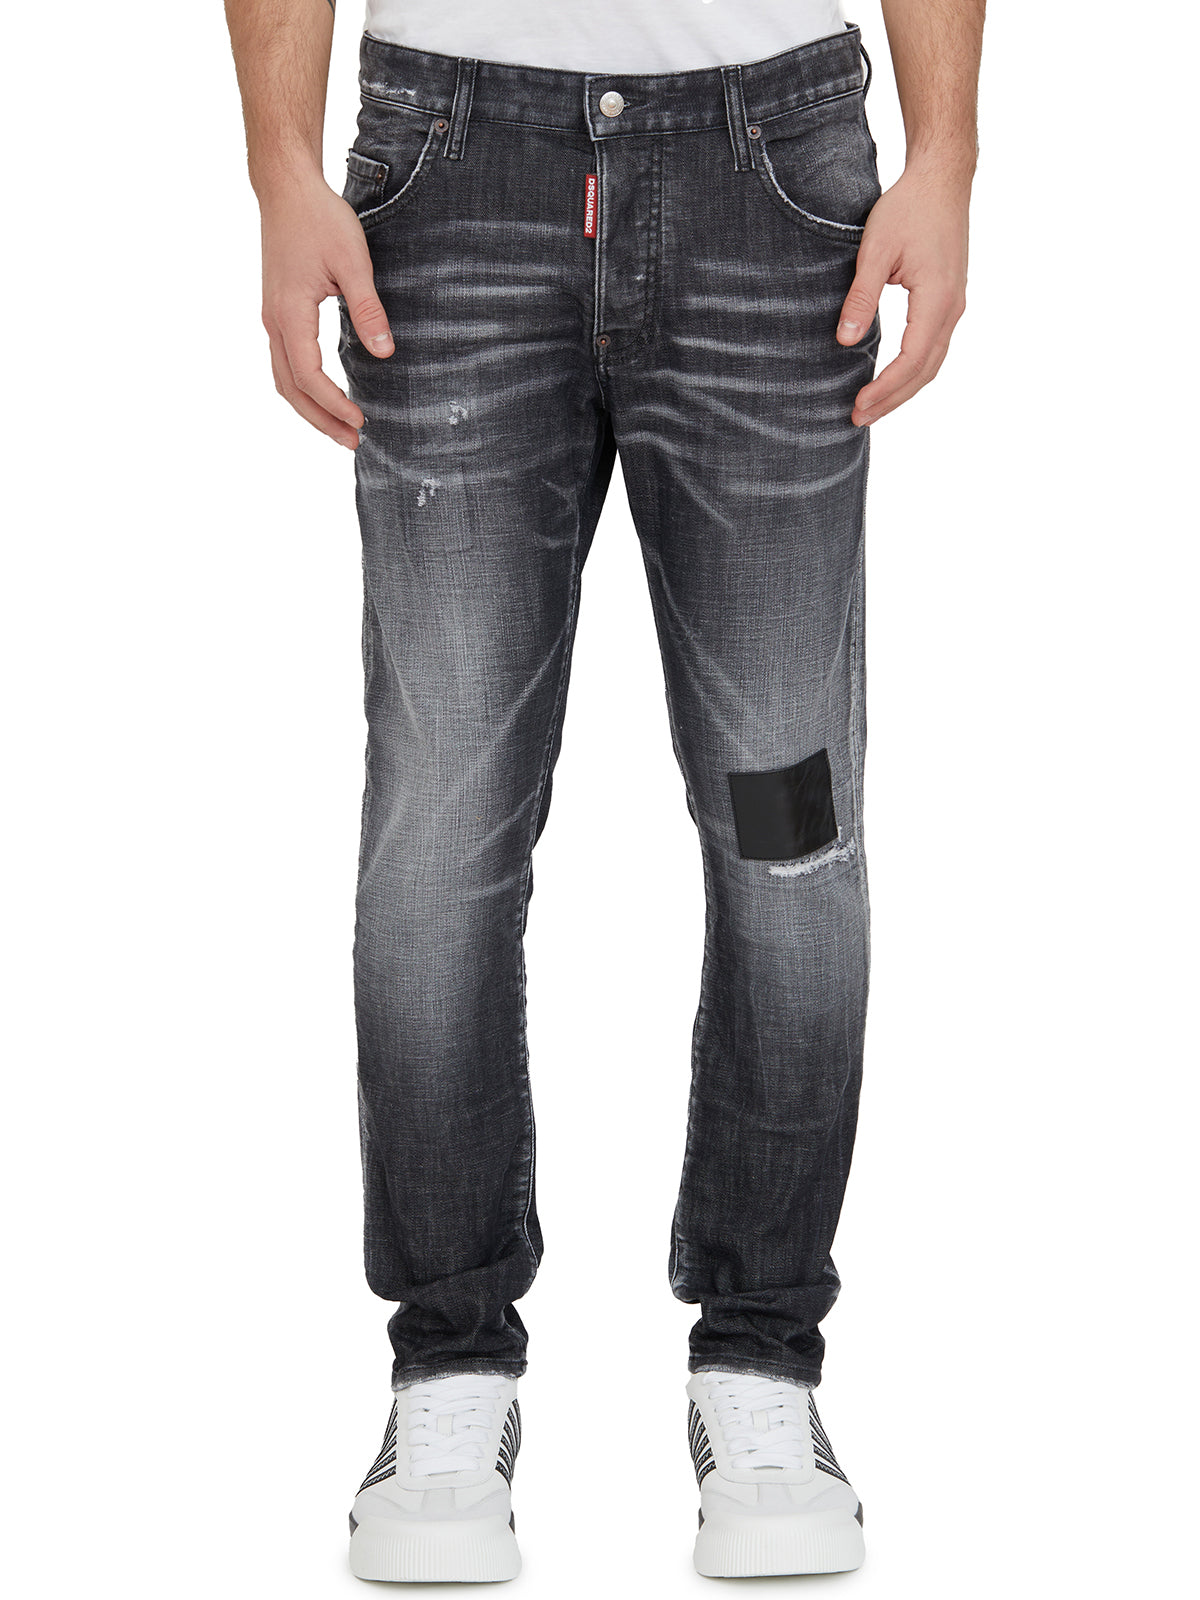 DSQUARED2 Slim Fit Black Denim Jeans with Ripped Patches for Men